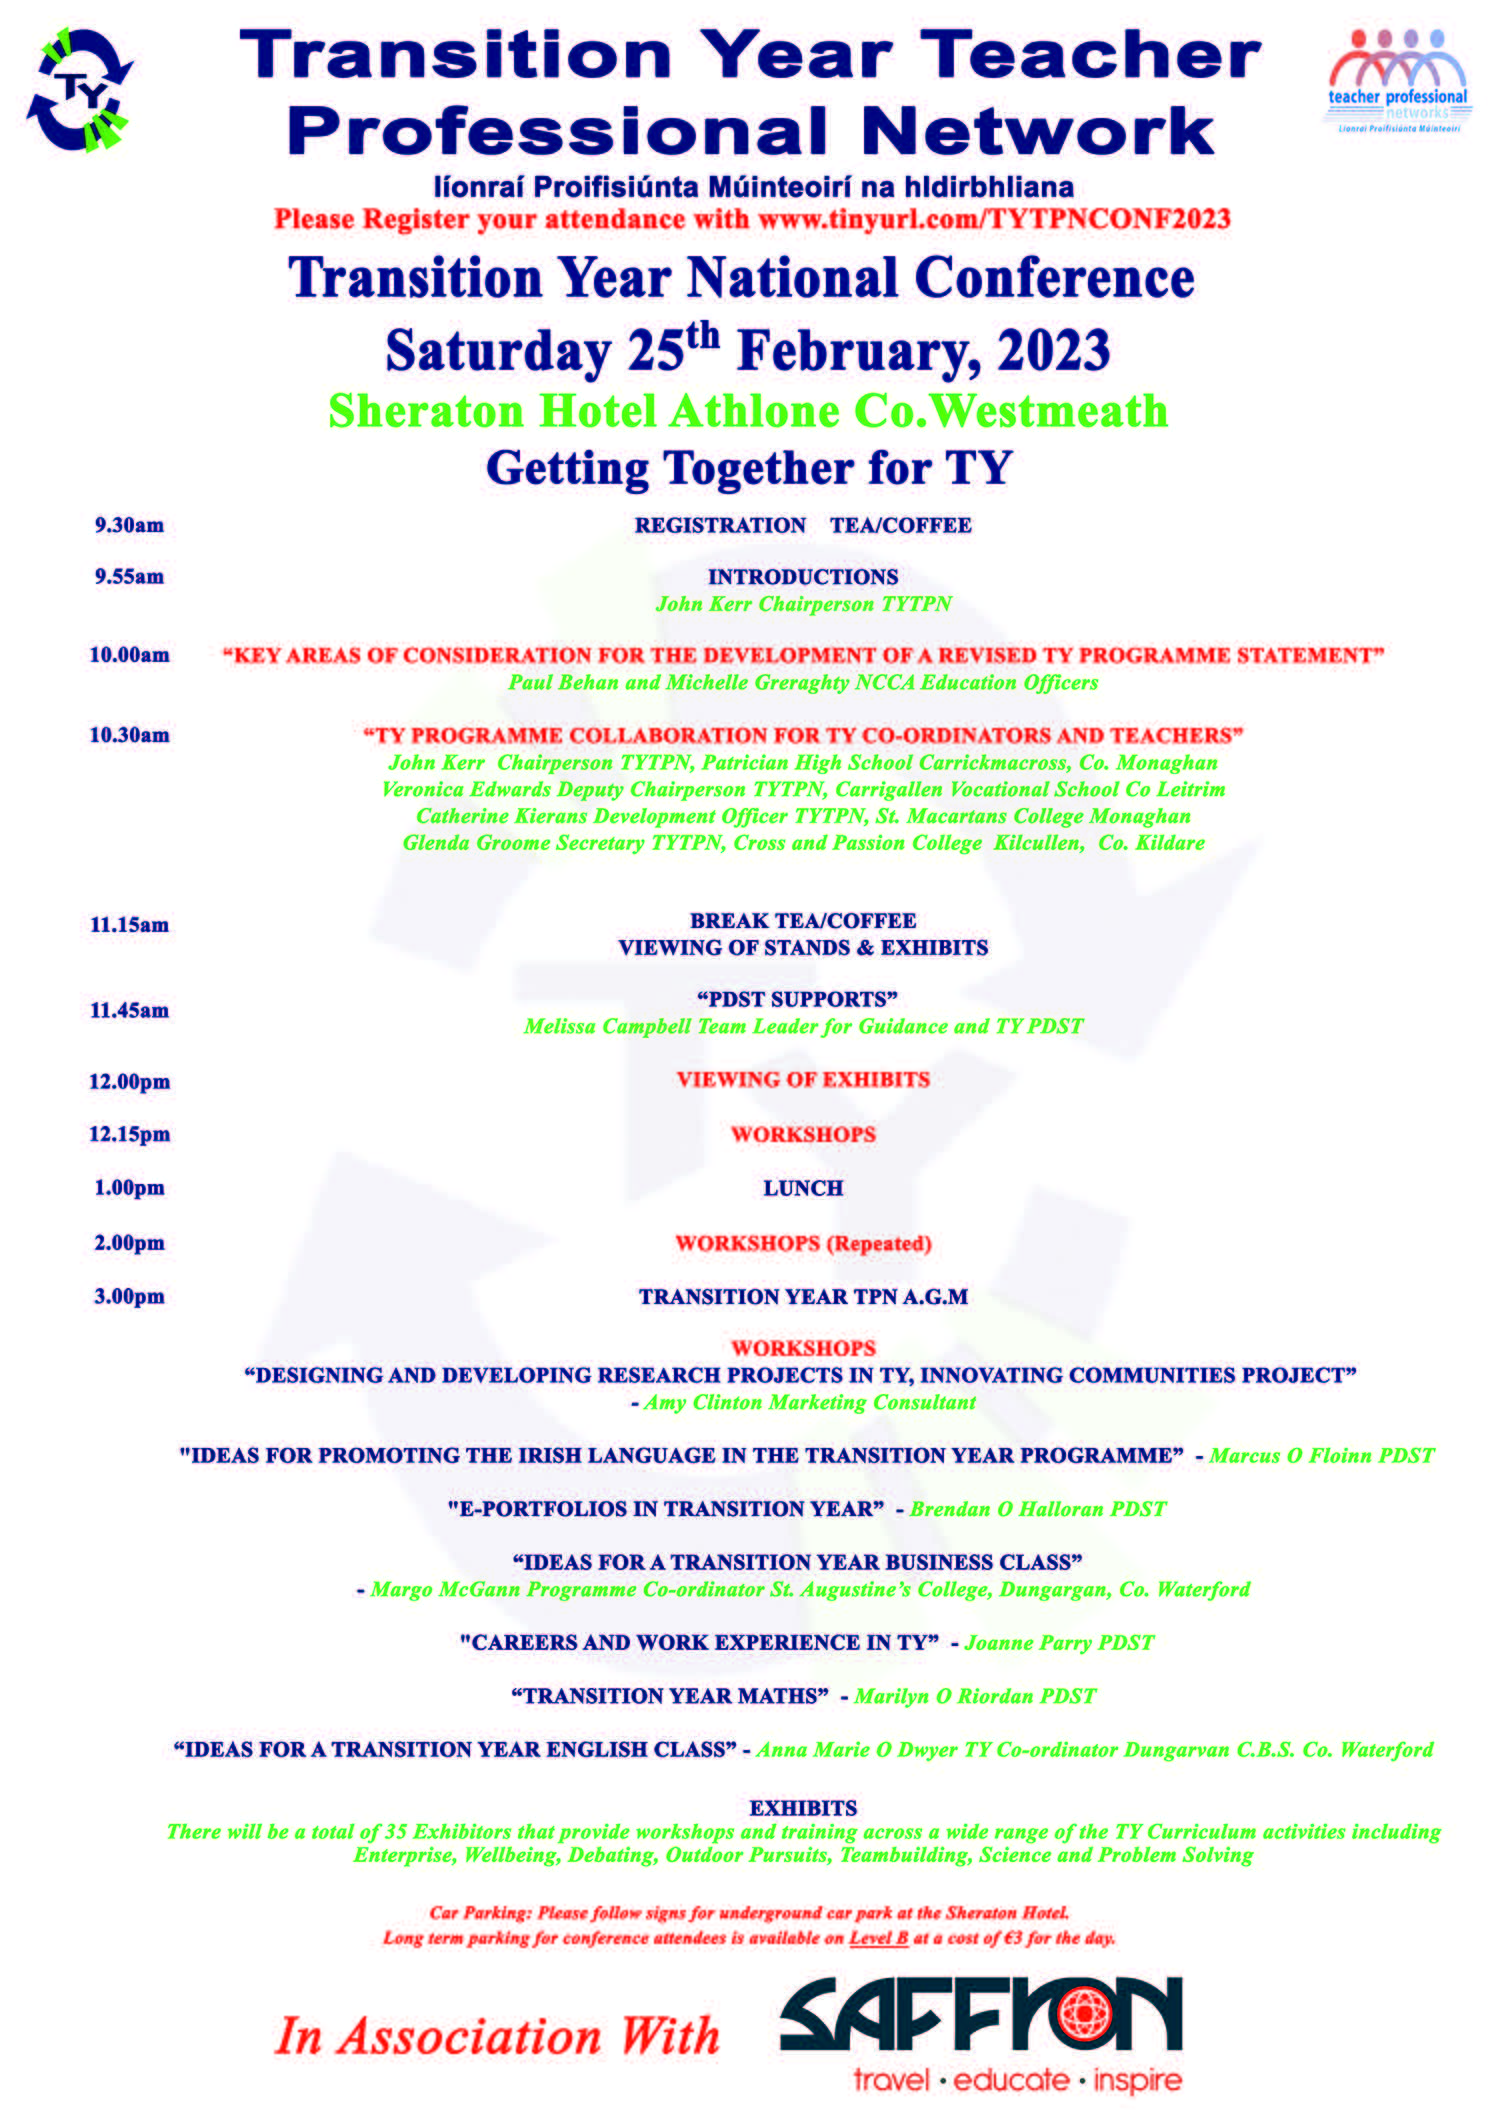 Transition Year National Conference 2023 Agenda